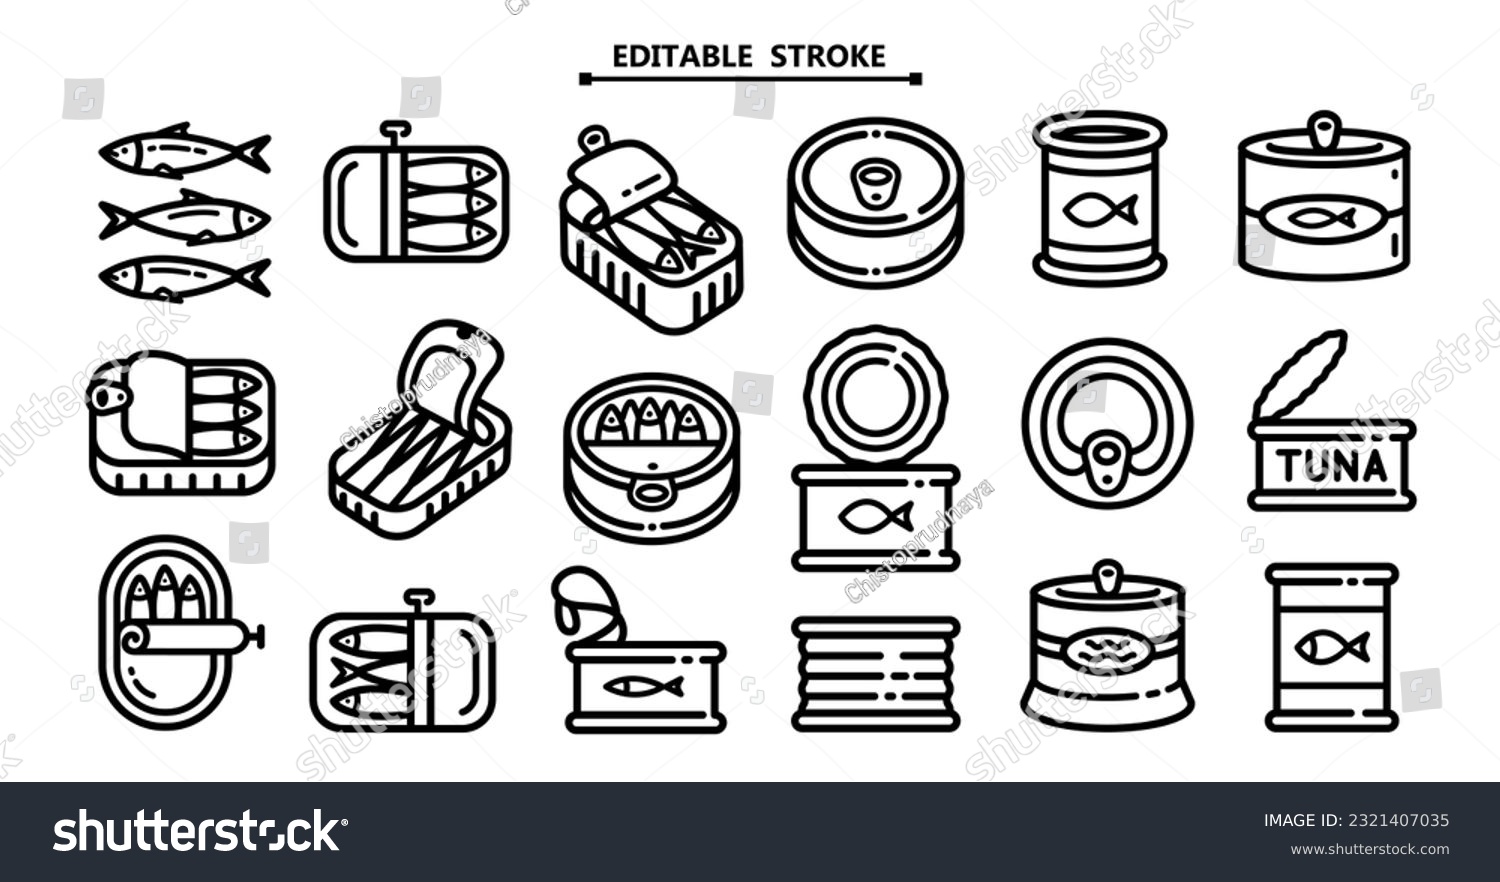 Tin can line icons set. Editable stroke. Outline collection of tin can vector icons for web design isolated on white background #2321407035